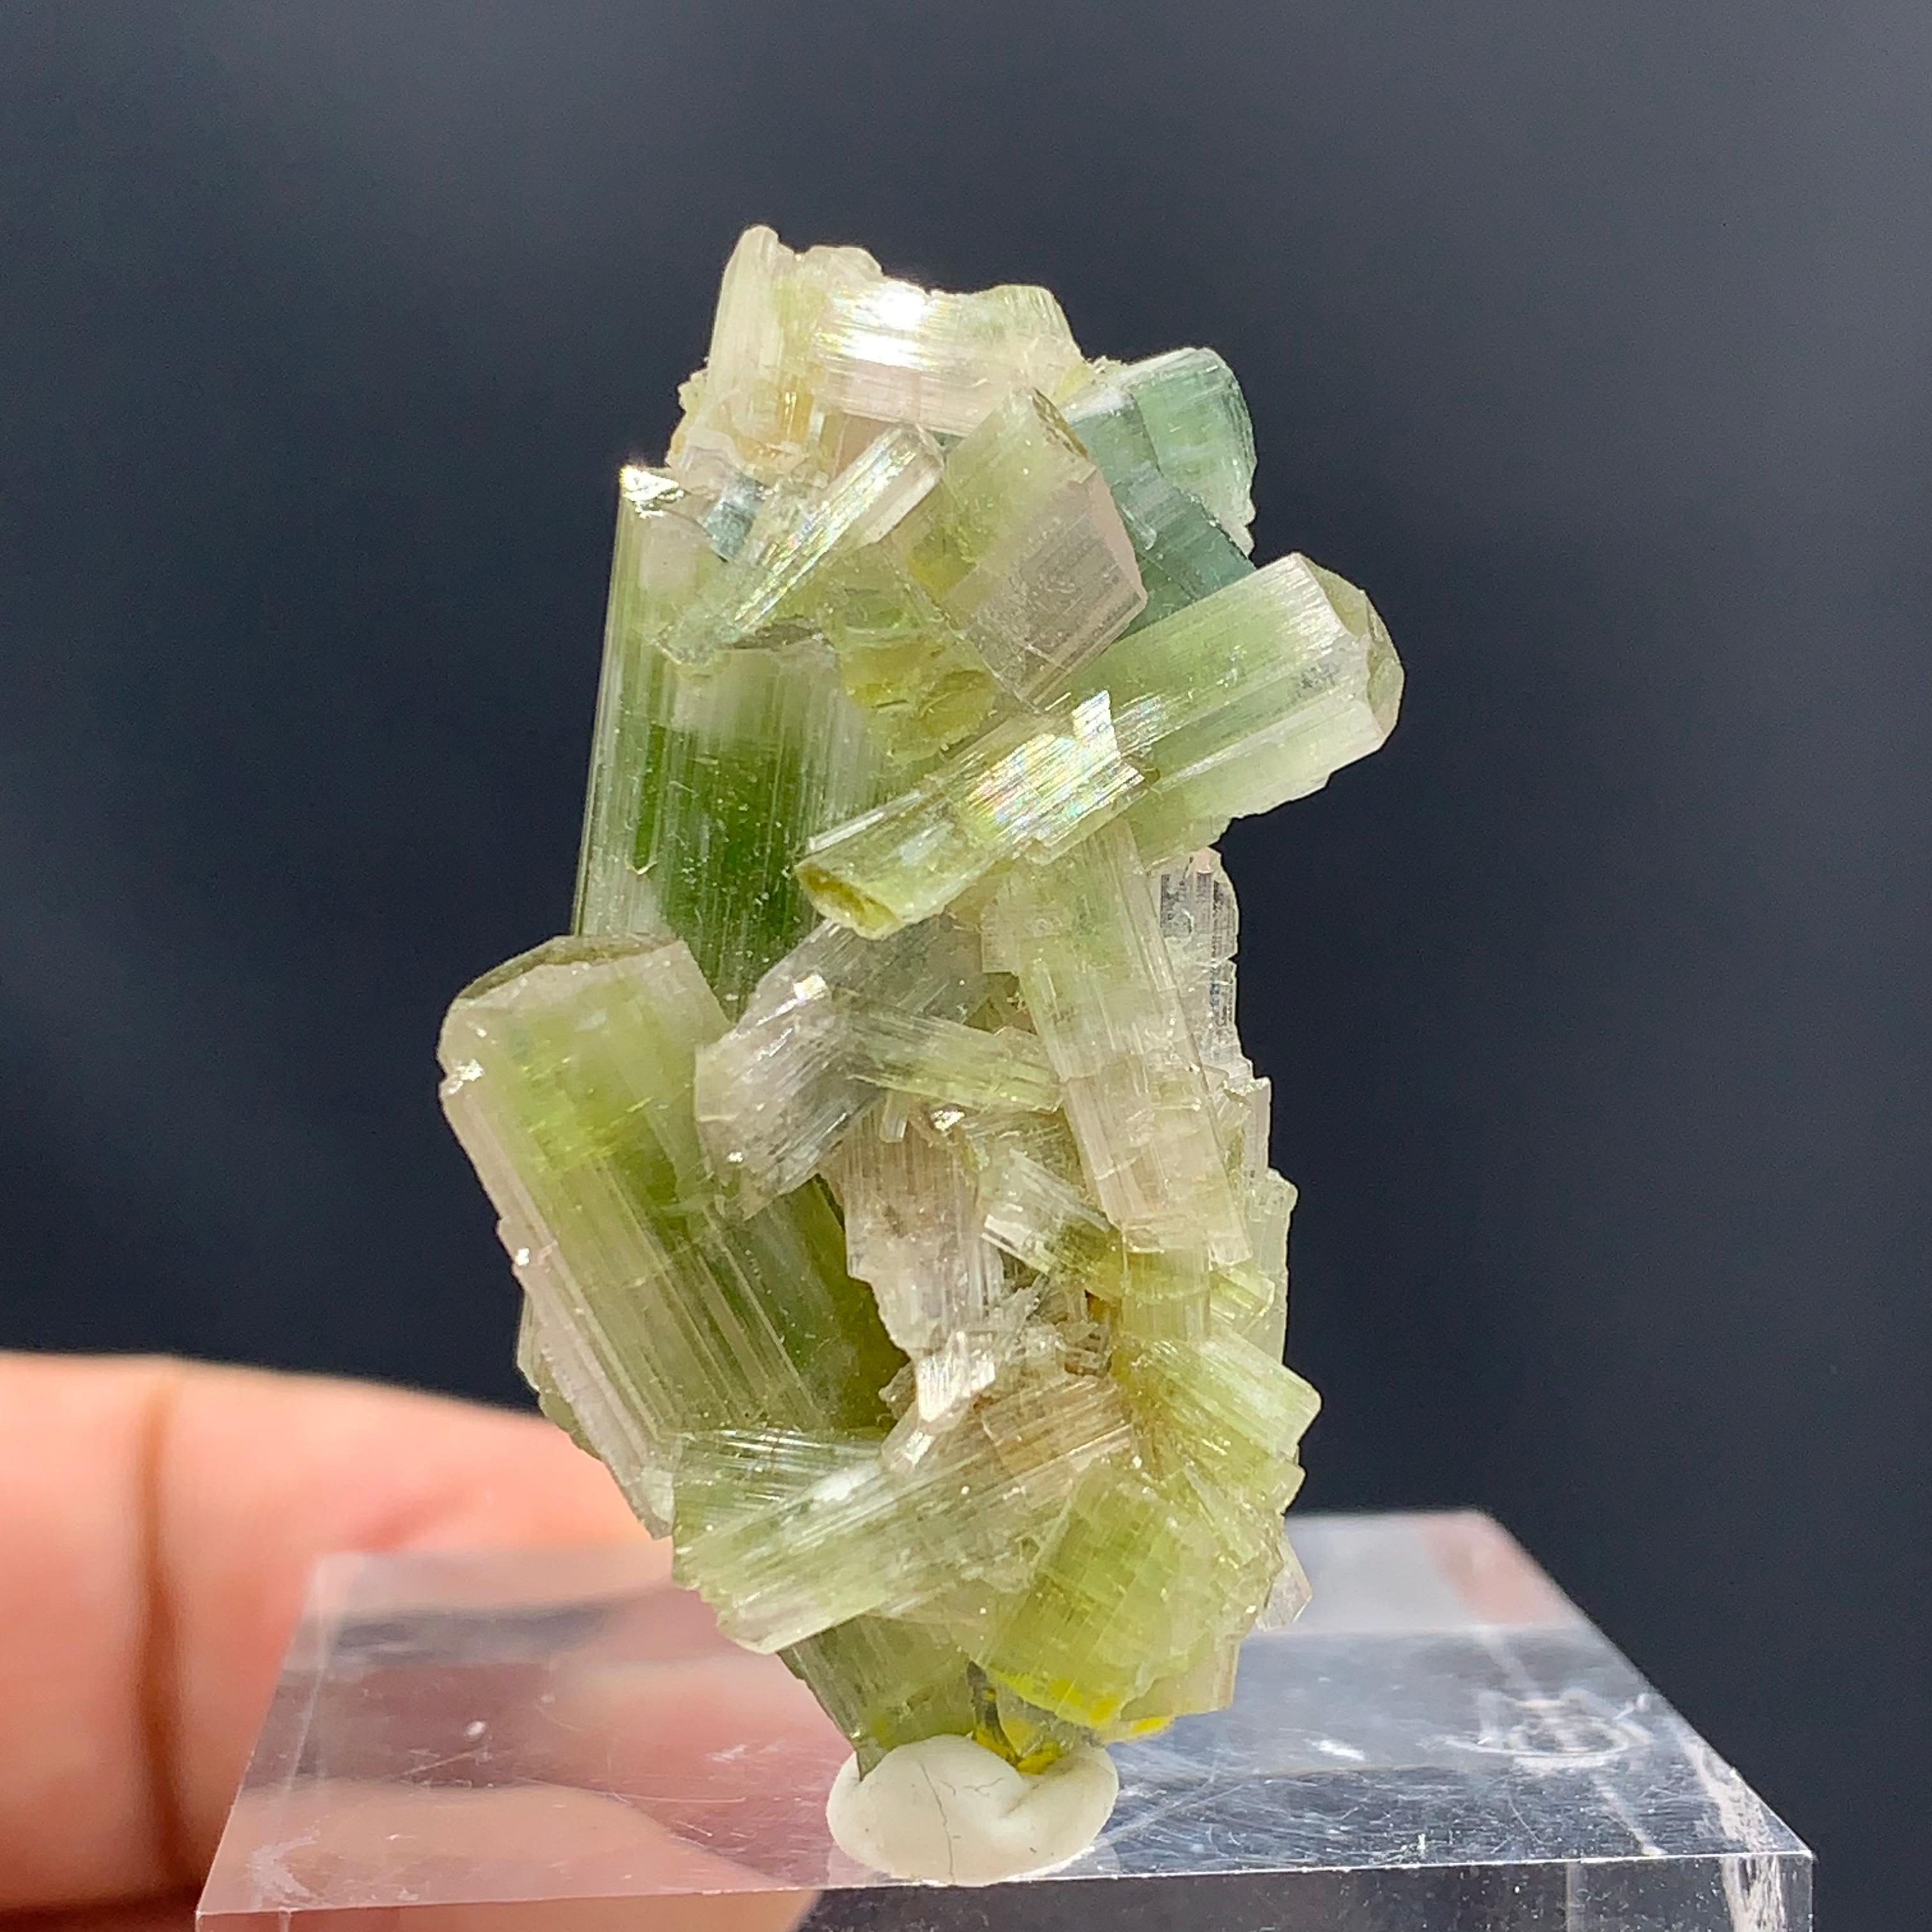 Other 60.05 Carat Glamorous Tourmaline Crystals Cluster From Afghanistan  For Sale